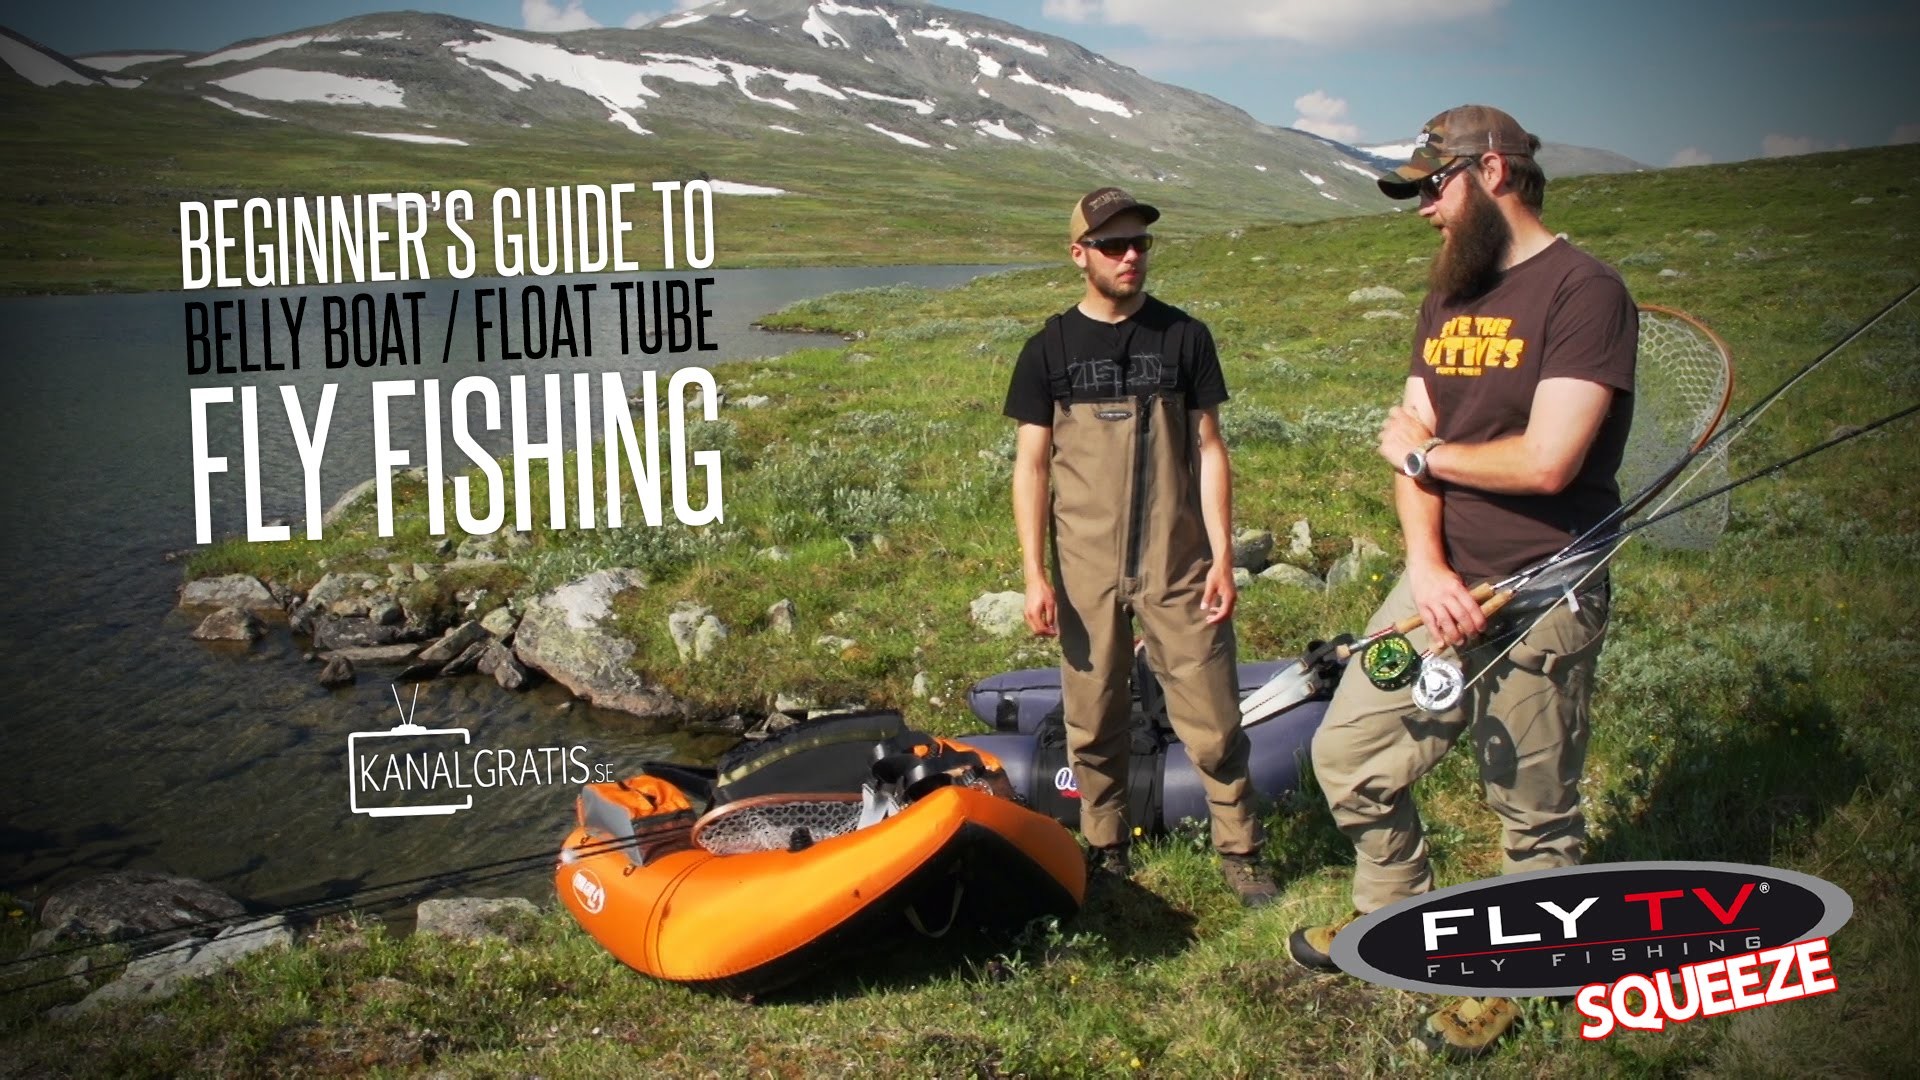 1920x1080 FLY TV Squeeze - Beginner's Guide to Belly Boat/Float Tube Fly Fishing -  YouTube